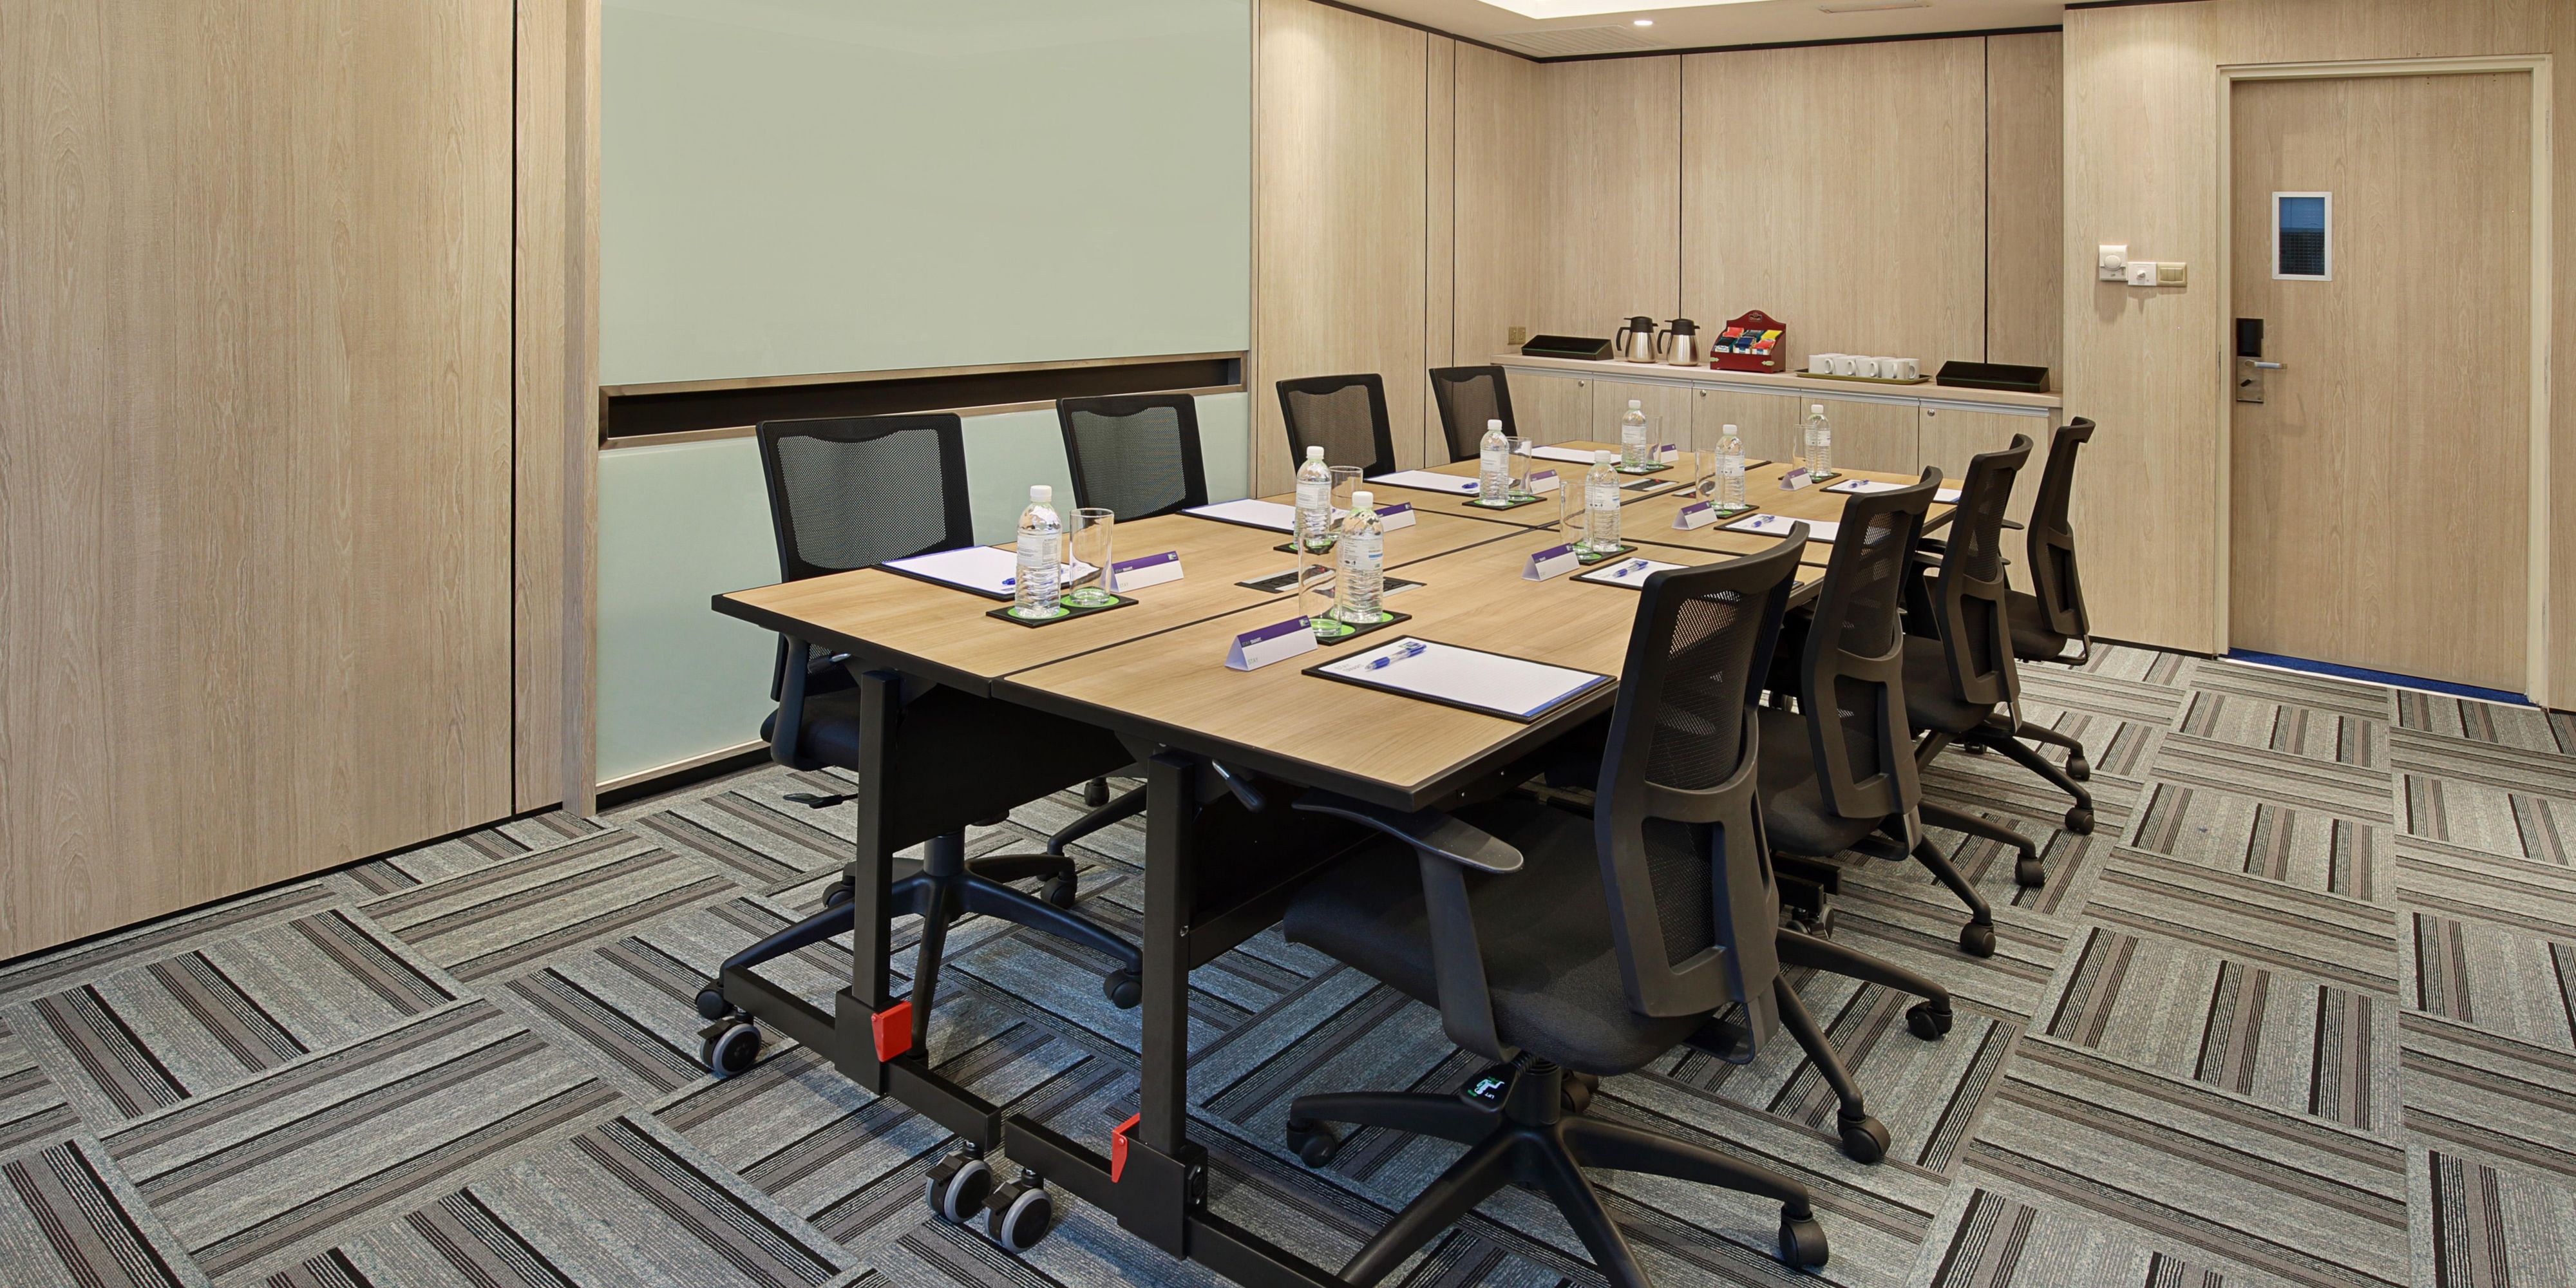 A cozy 8 persons Boardroom with natural daylight. Prepared with a projector, projection screen, writing board and free Wi-Fi to perform an ideal intimate meeting for our guests. For enquiries or booking, contact us at +603 2028 8888